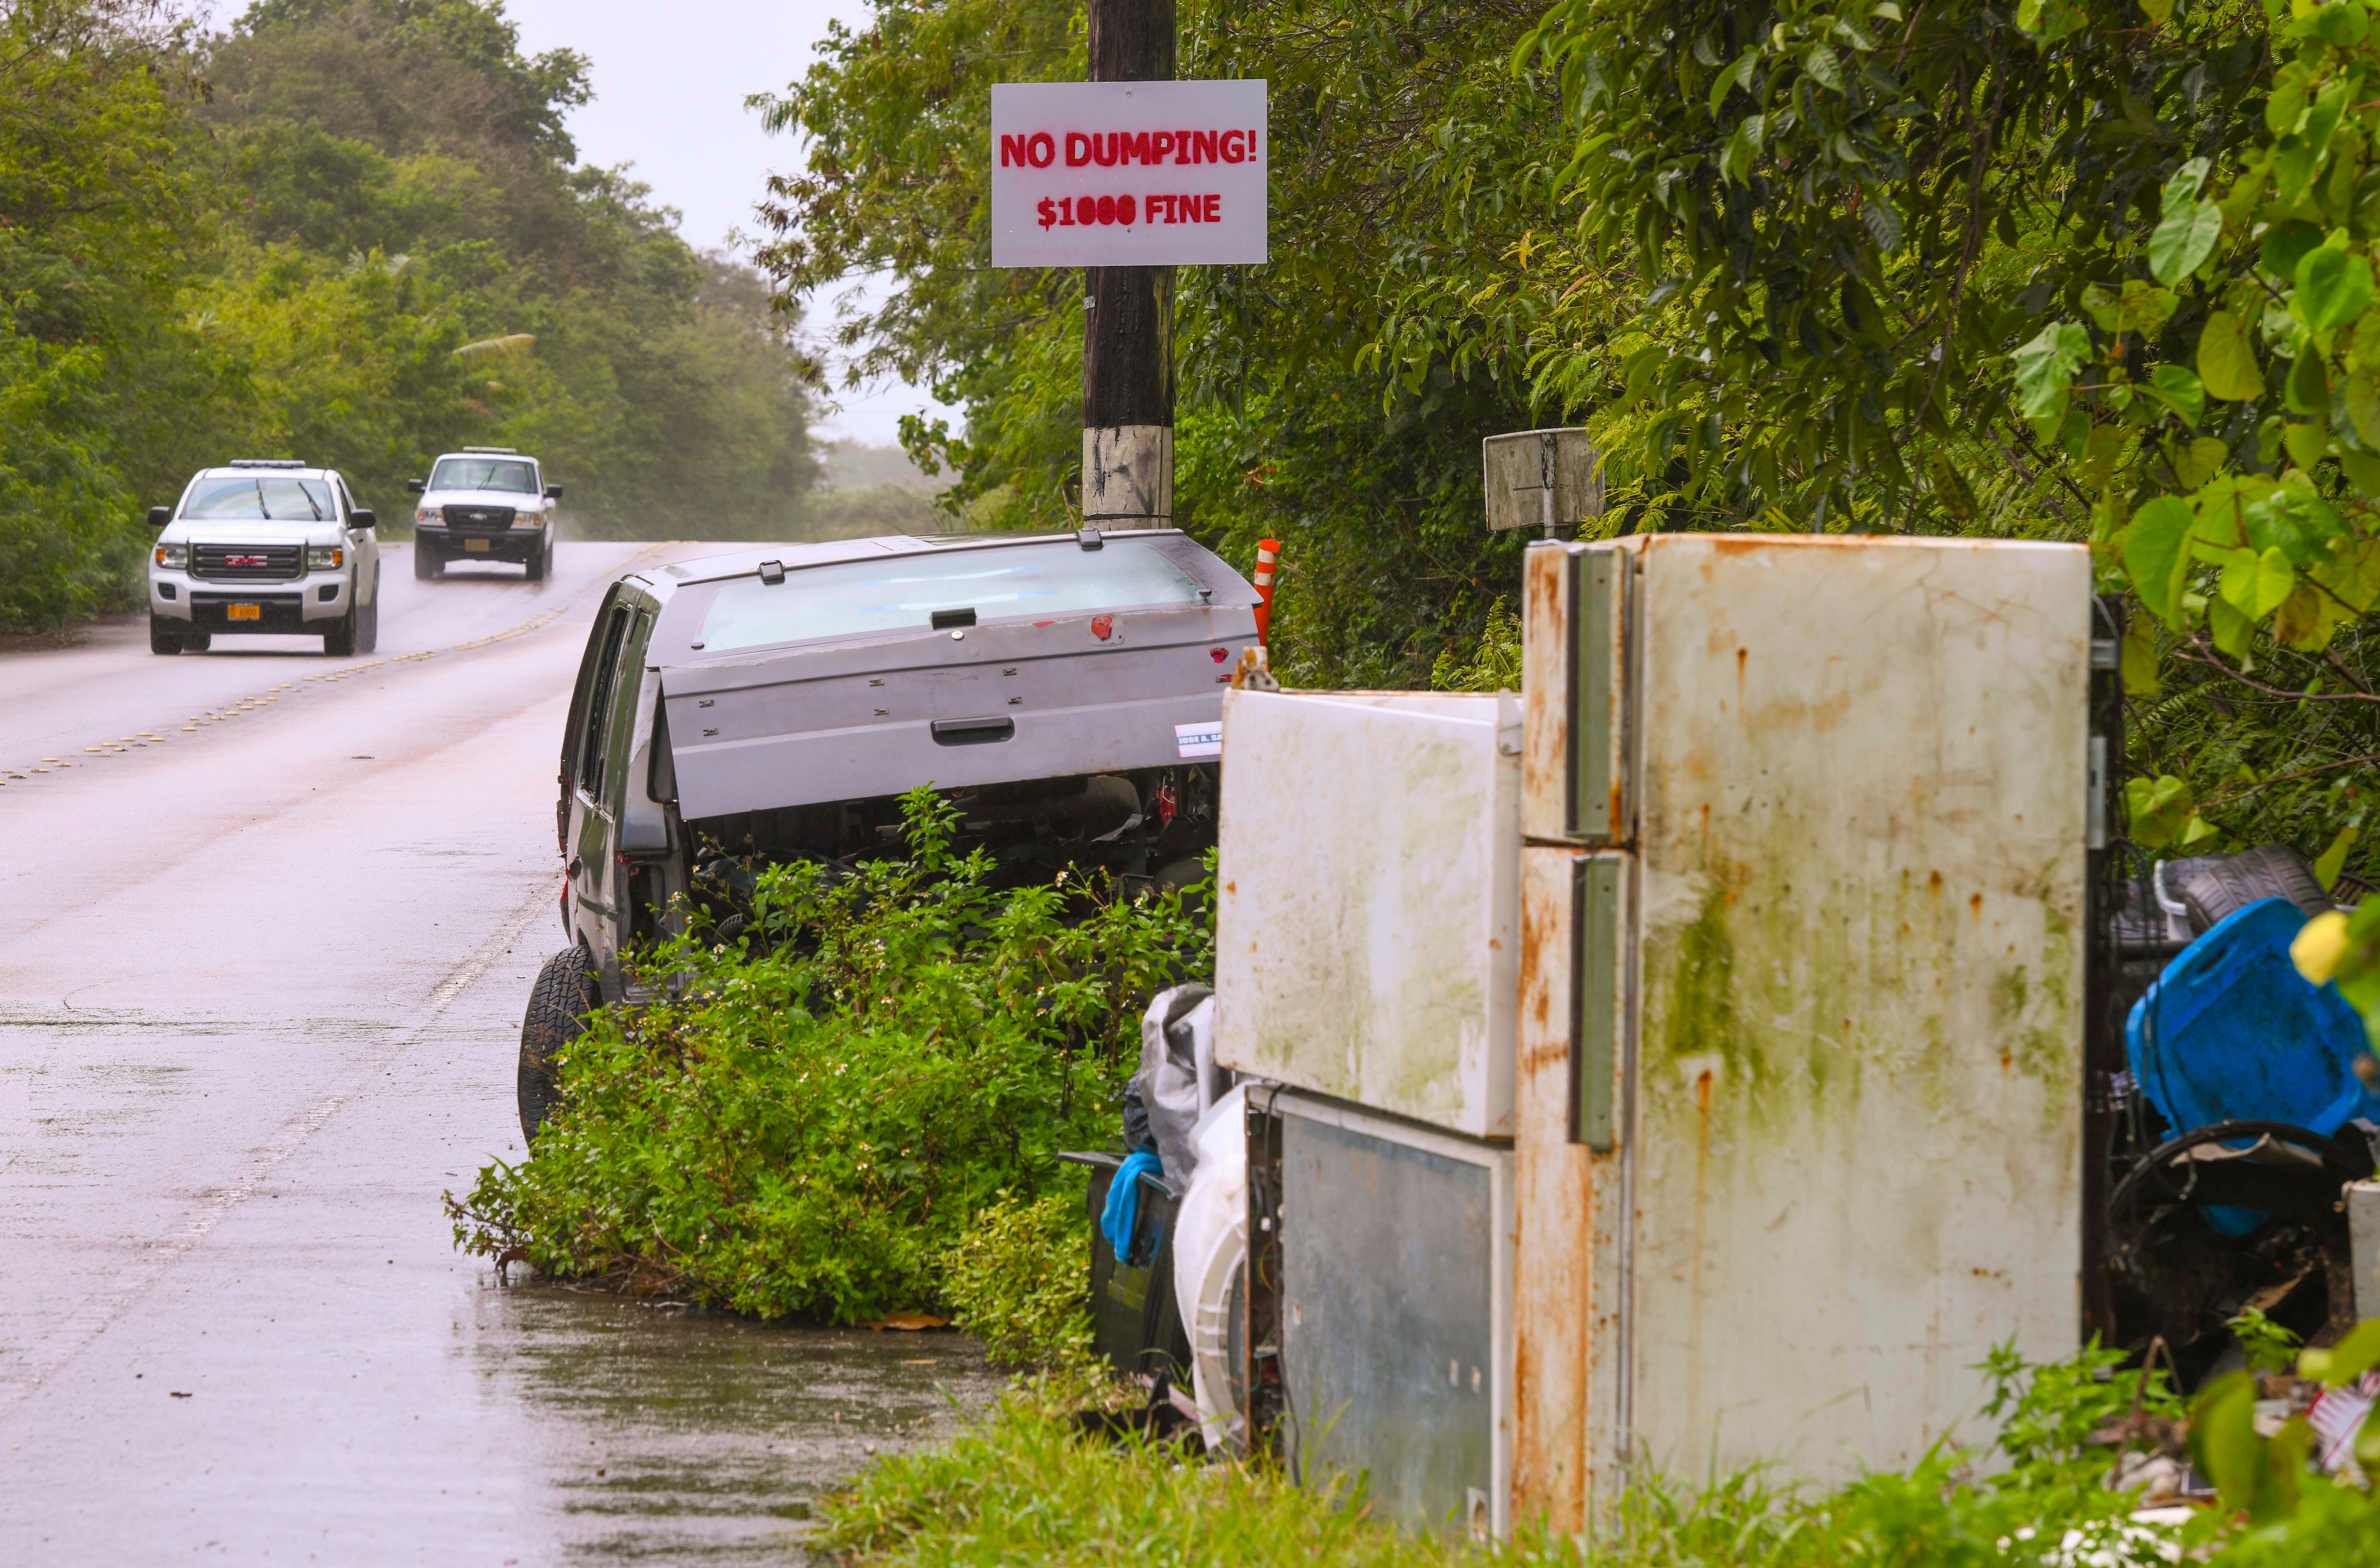 An abandoned vehicle, appliances and other discarded debris seen at the base of a utility pole with a sign, stipulating the penalty for illegal dumping, along Bumuchachu Street in Dededo in this Feb. 25 file photo.